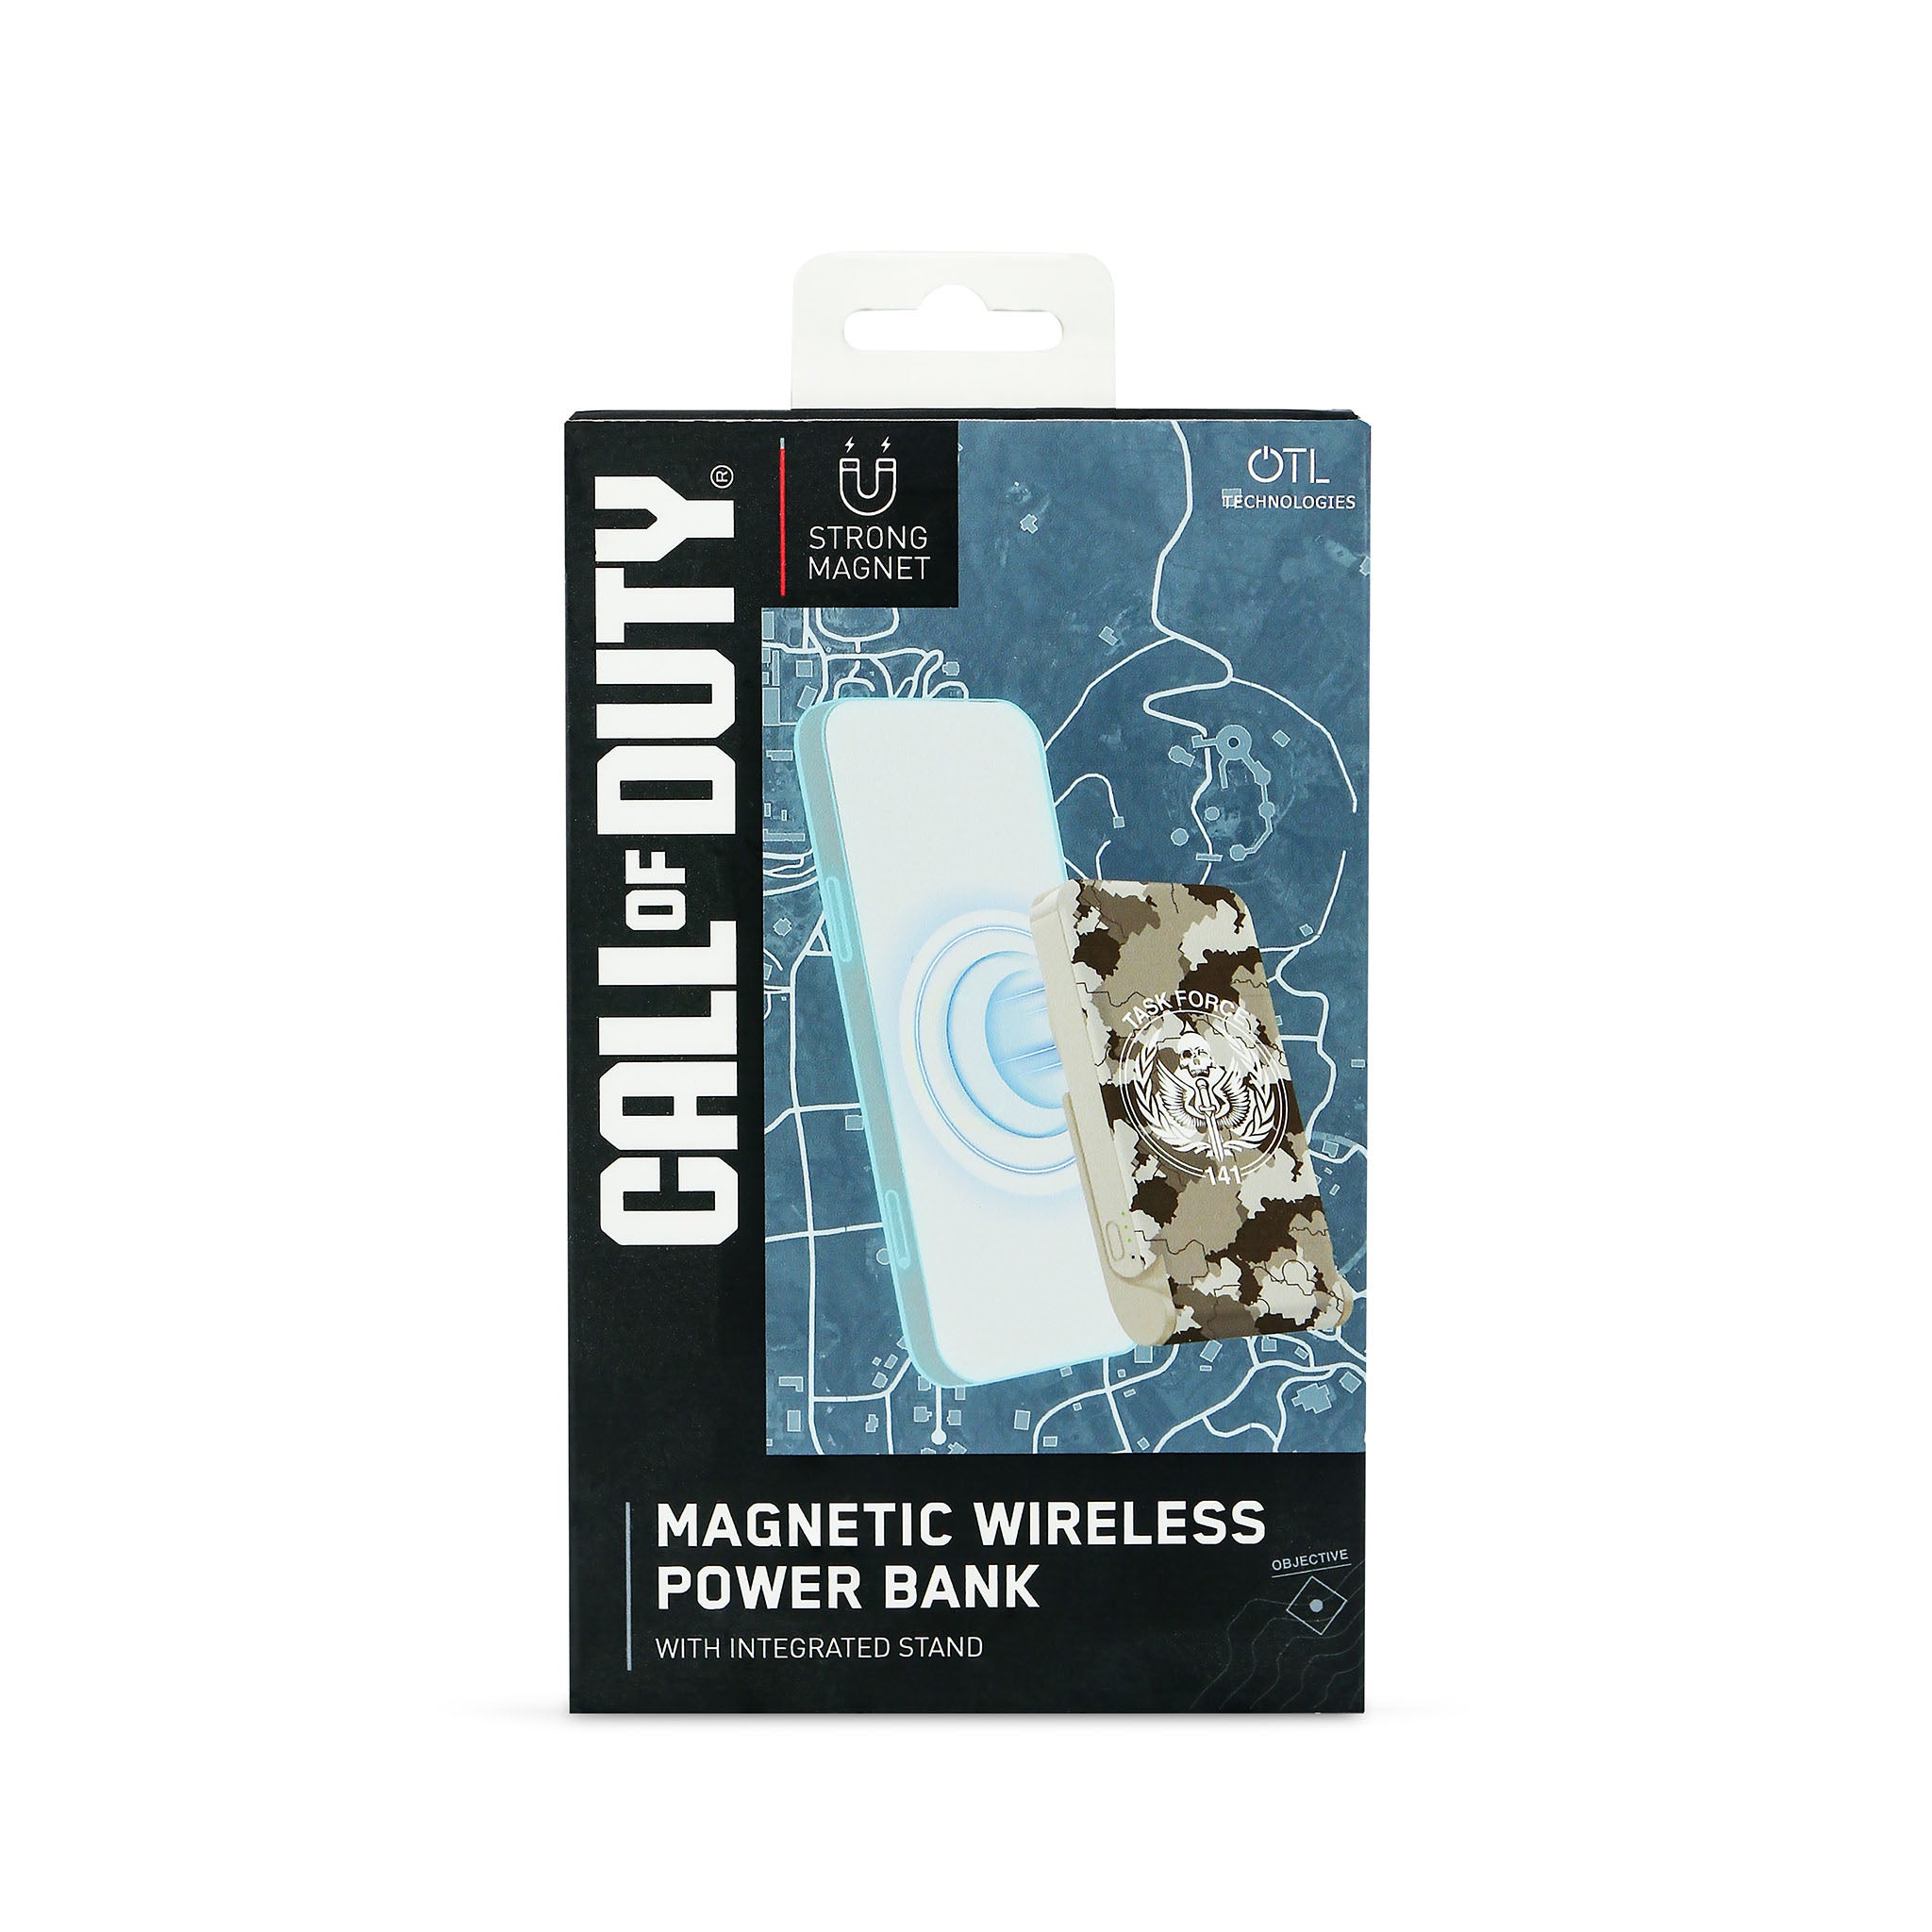 Call of Duty Magnetic Wireless Power bank